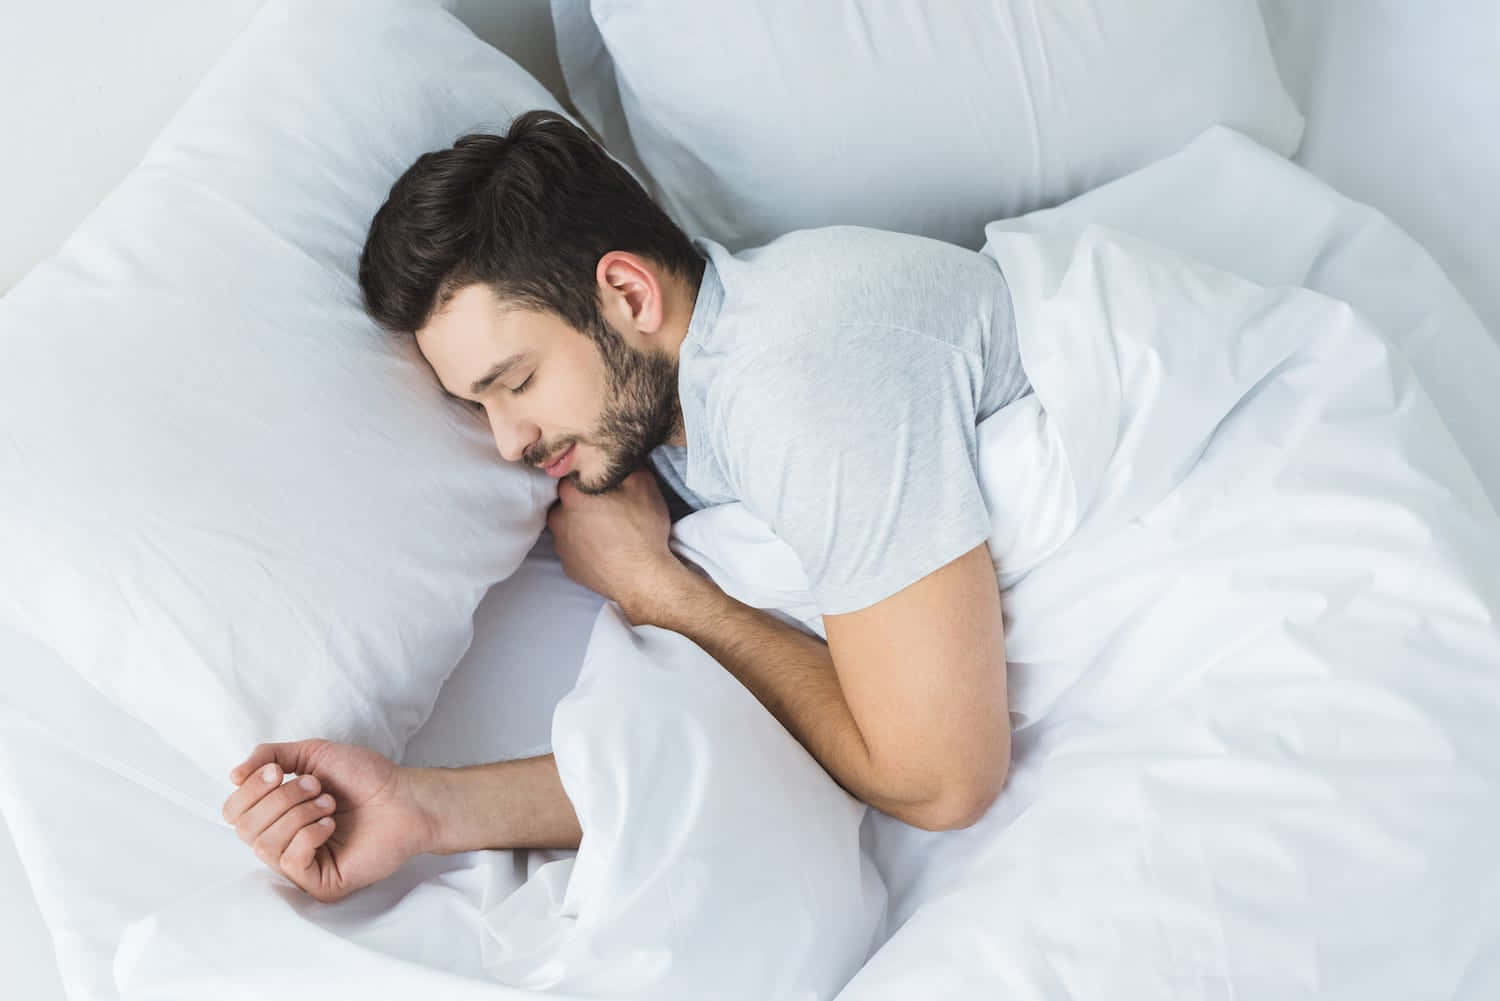 Man Sleeping In Bed With White Sheets